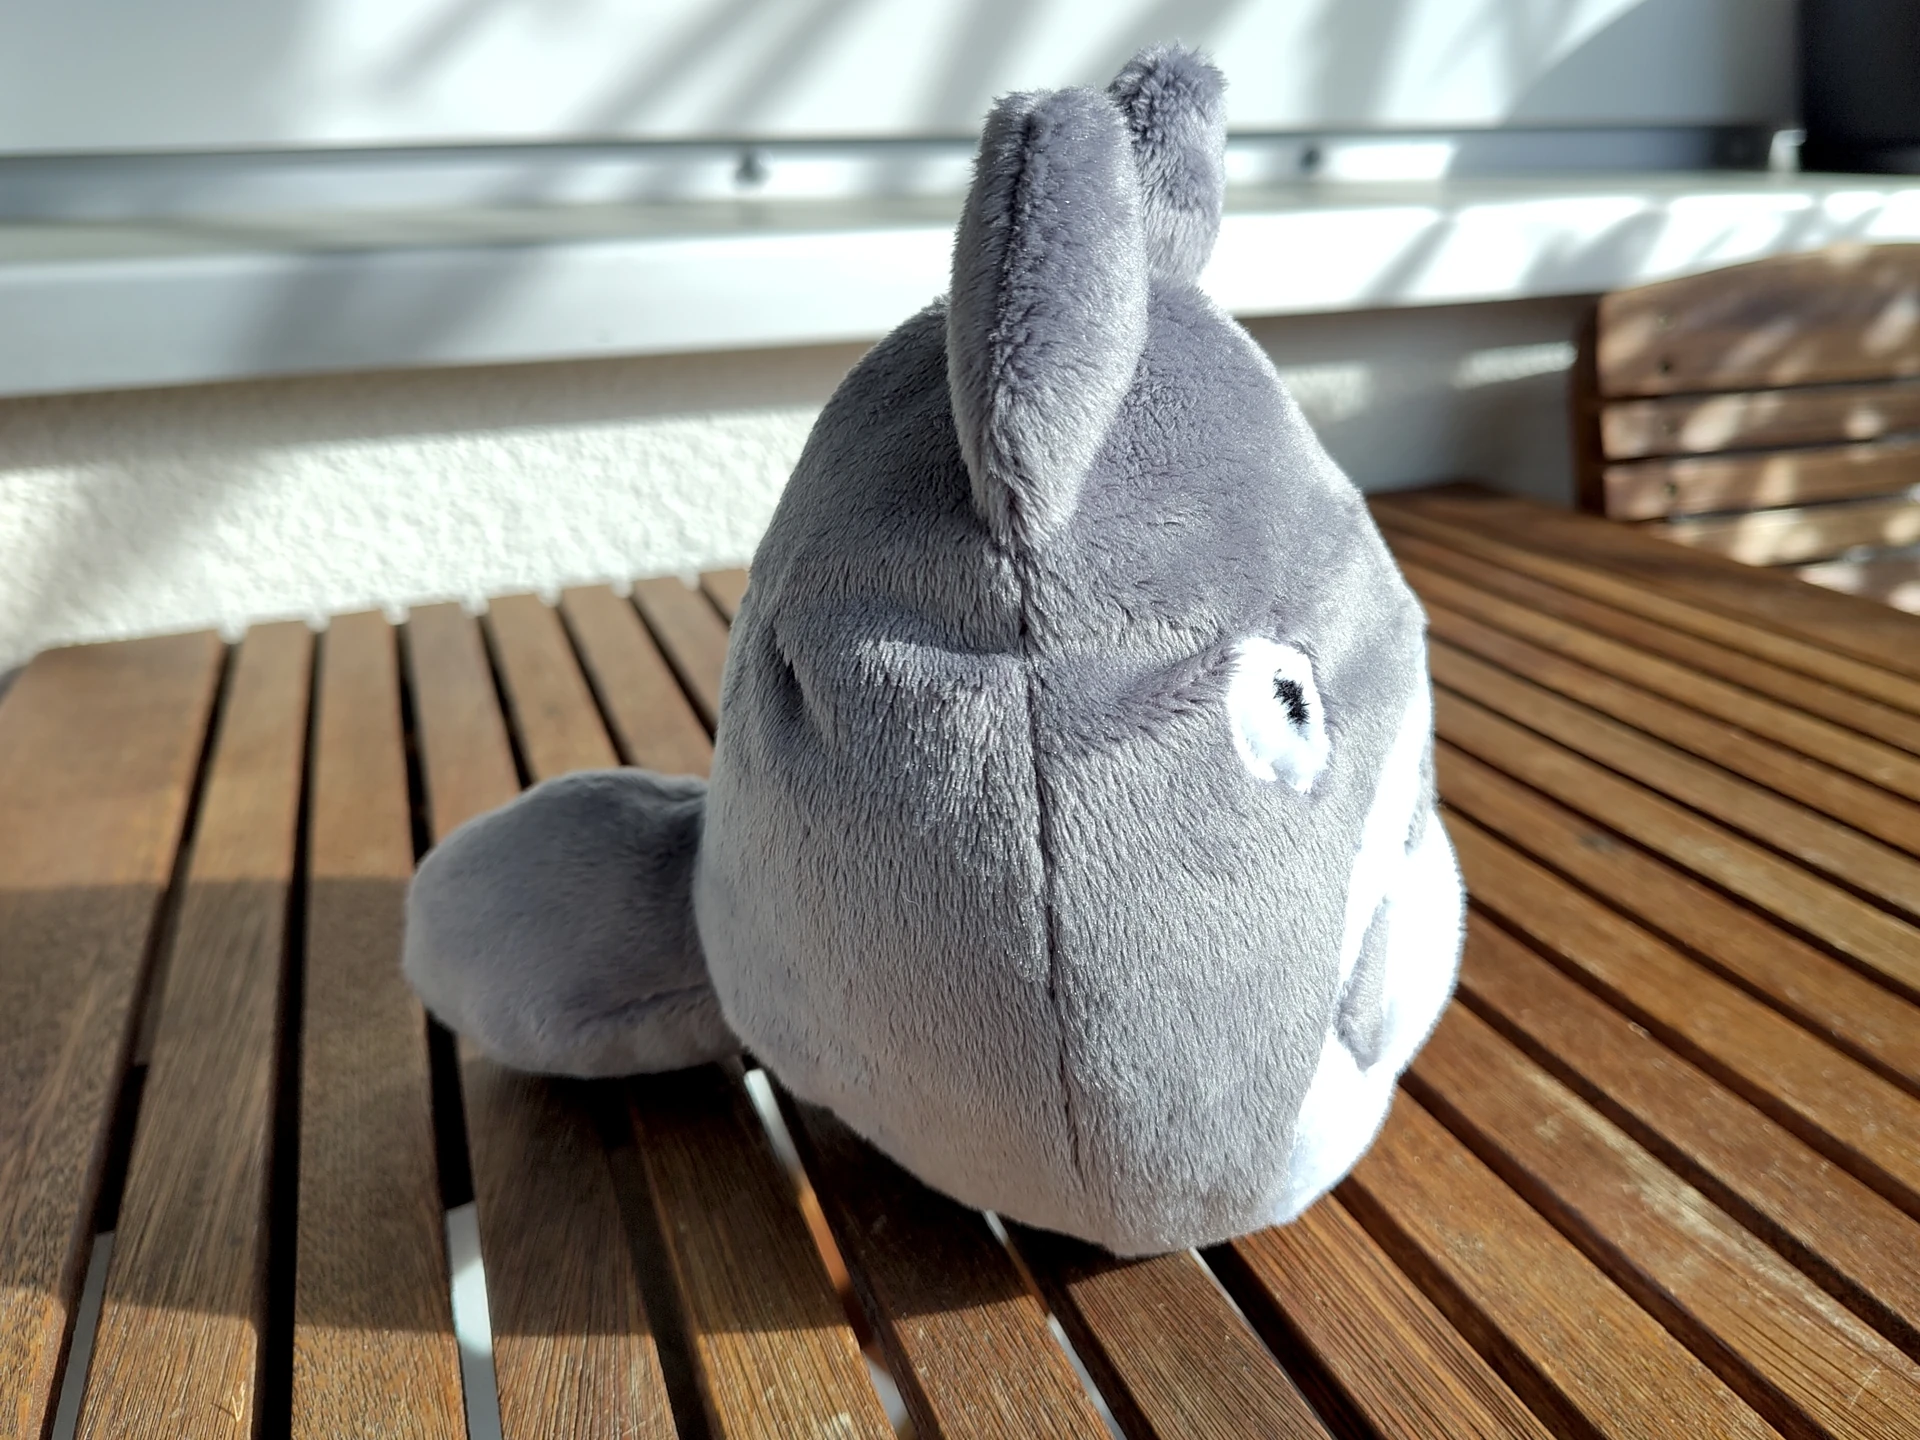 The same plushie seen from the side to reveal a short but fluffy tail.